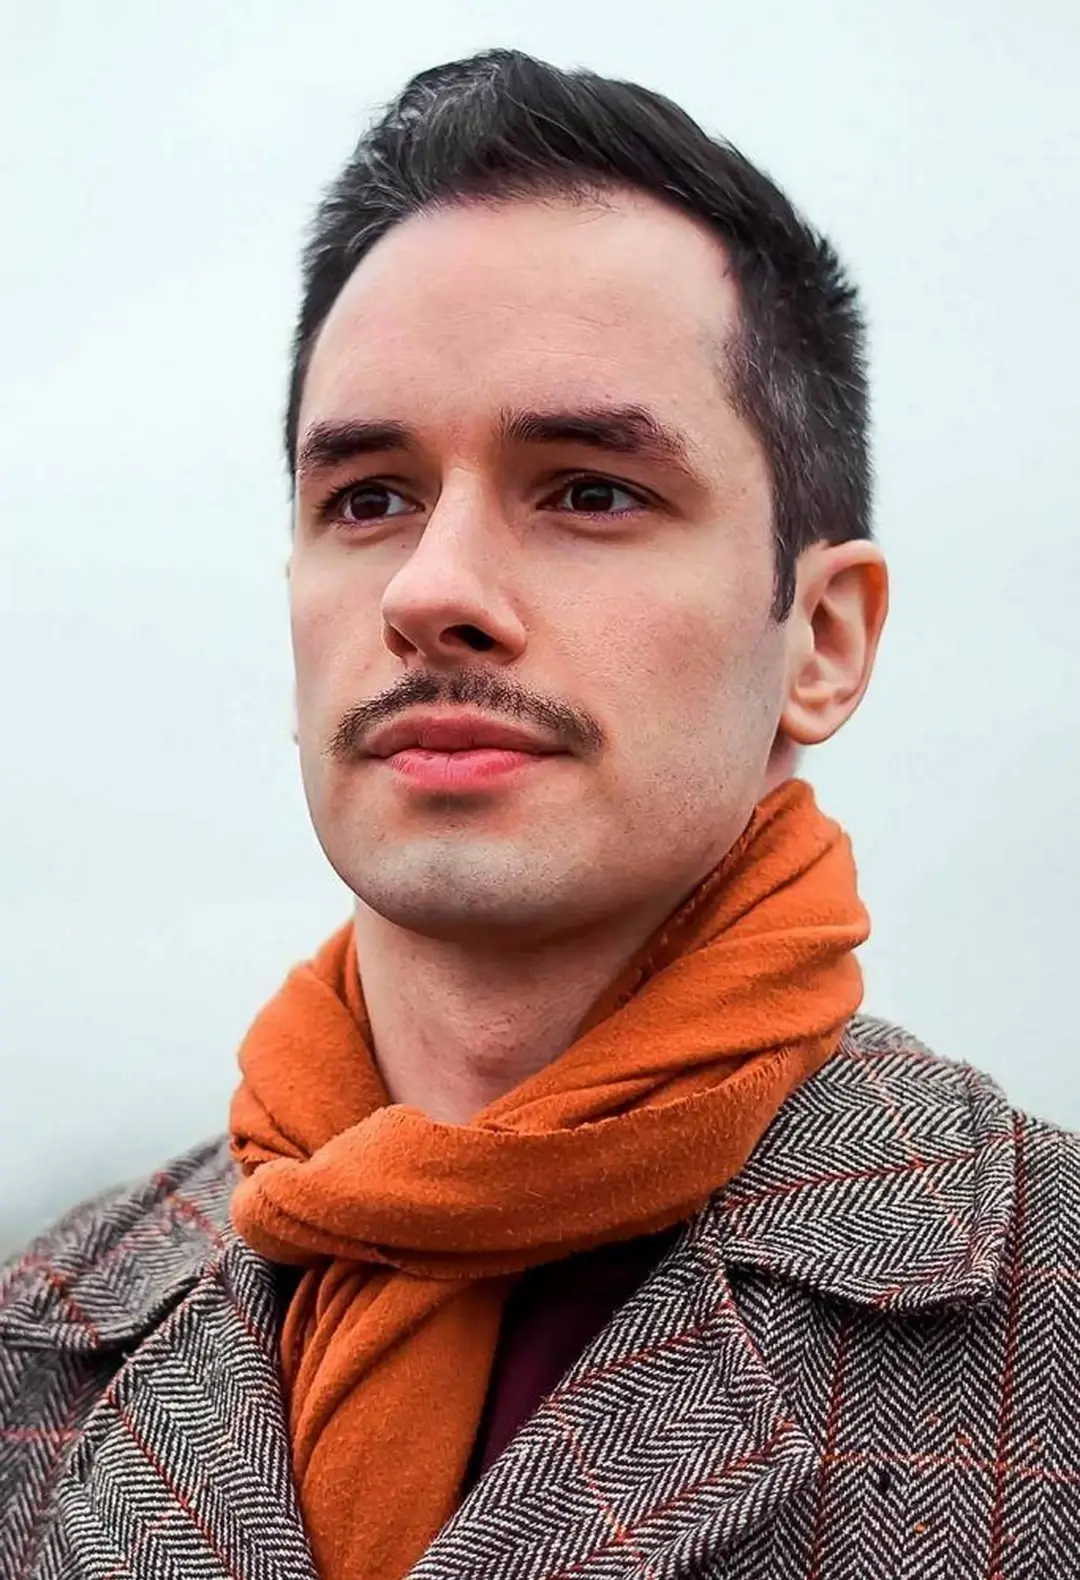 Men's Pencil Mustache with Short Hair from Fifth Ave Barber Shop in Midtown NYC